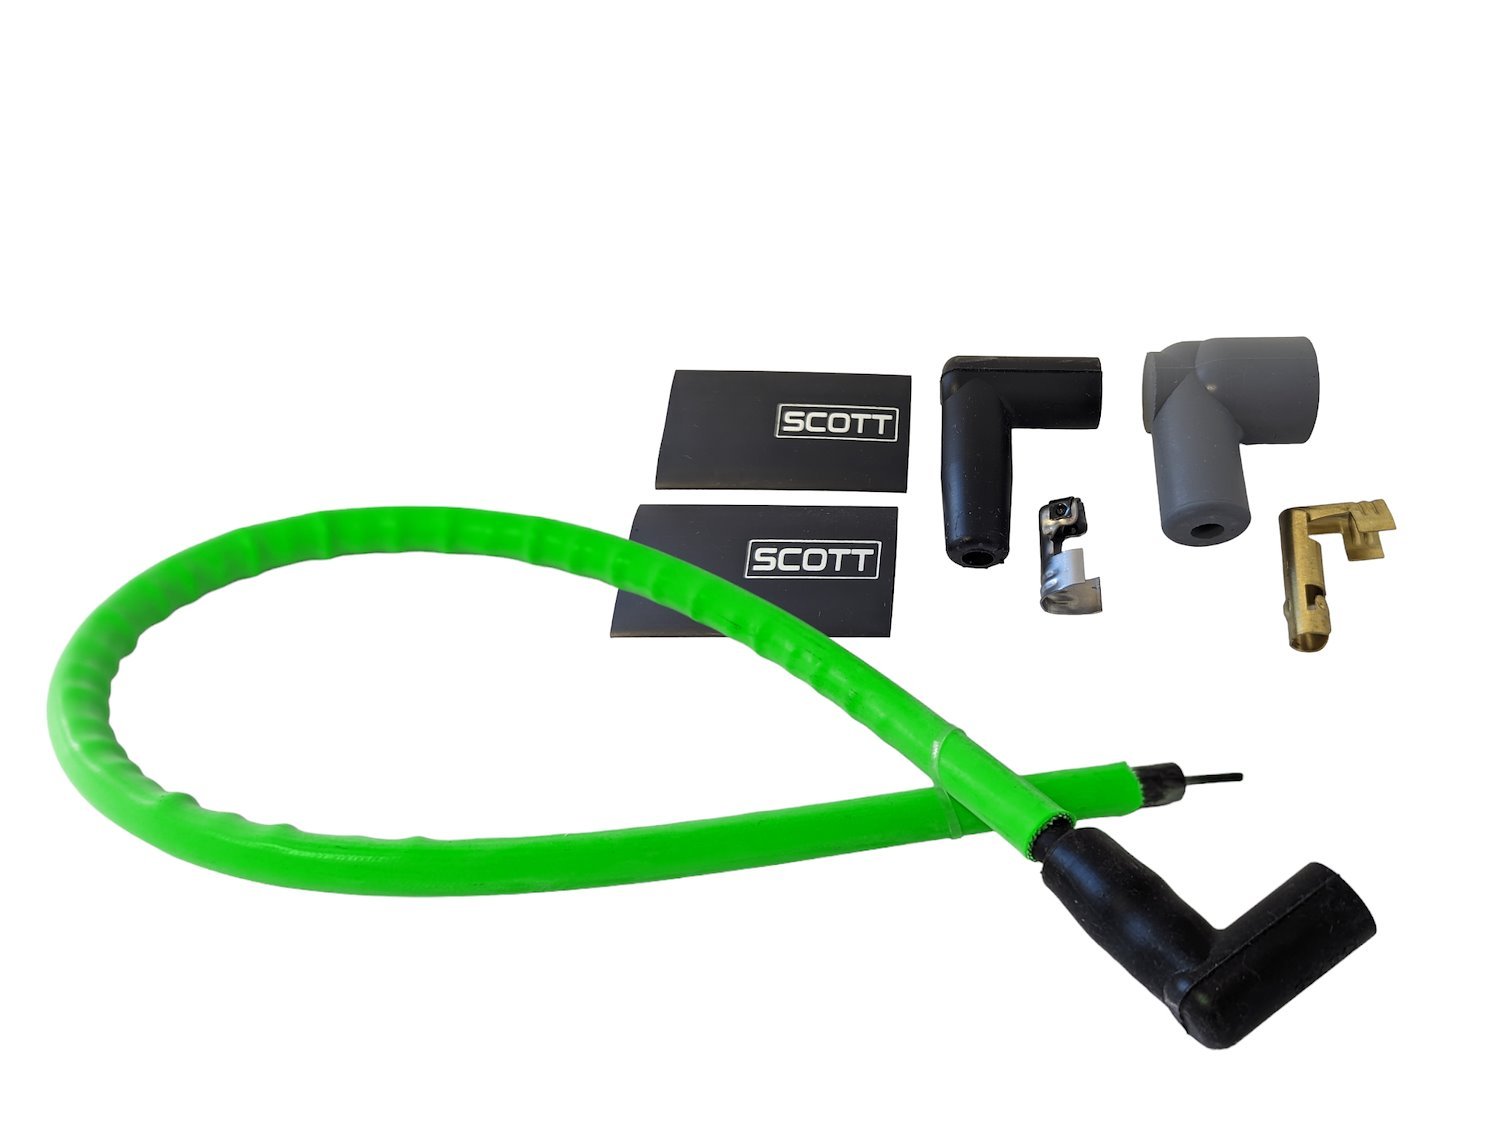 SPW-CW-48-8 48 in. High-Performance Silicone-Sleeved Coil Wire Kit [Fluorescent Green]